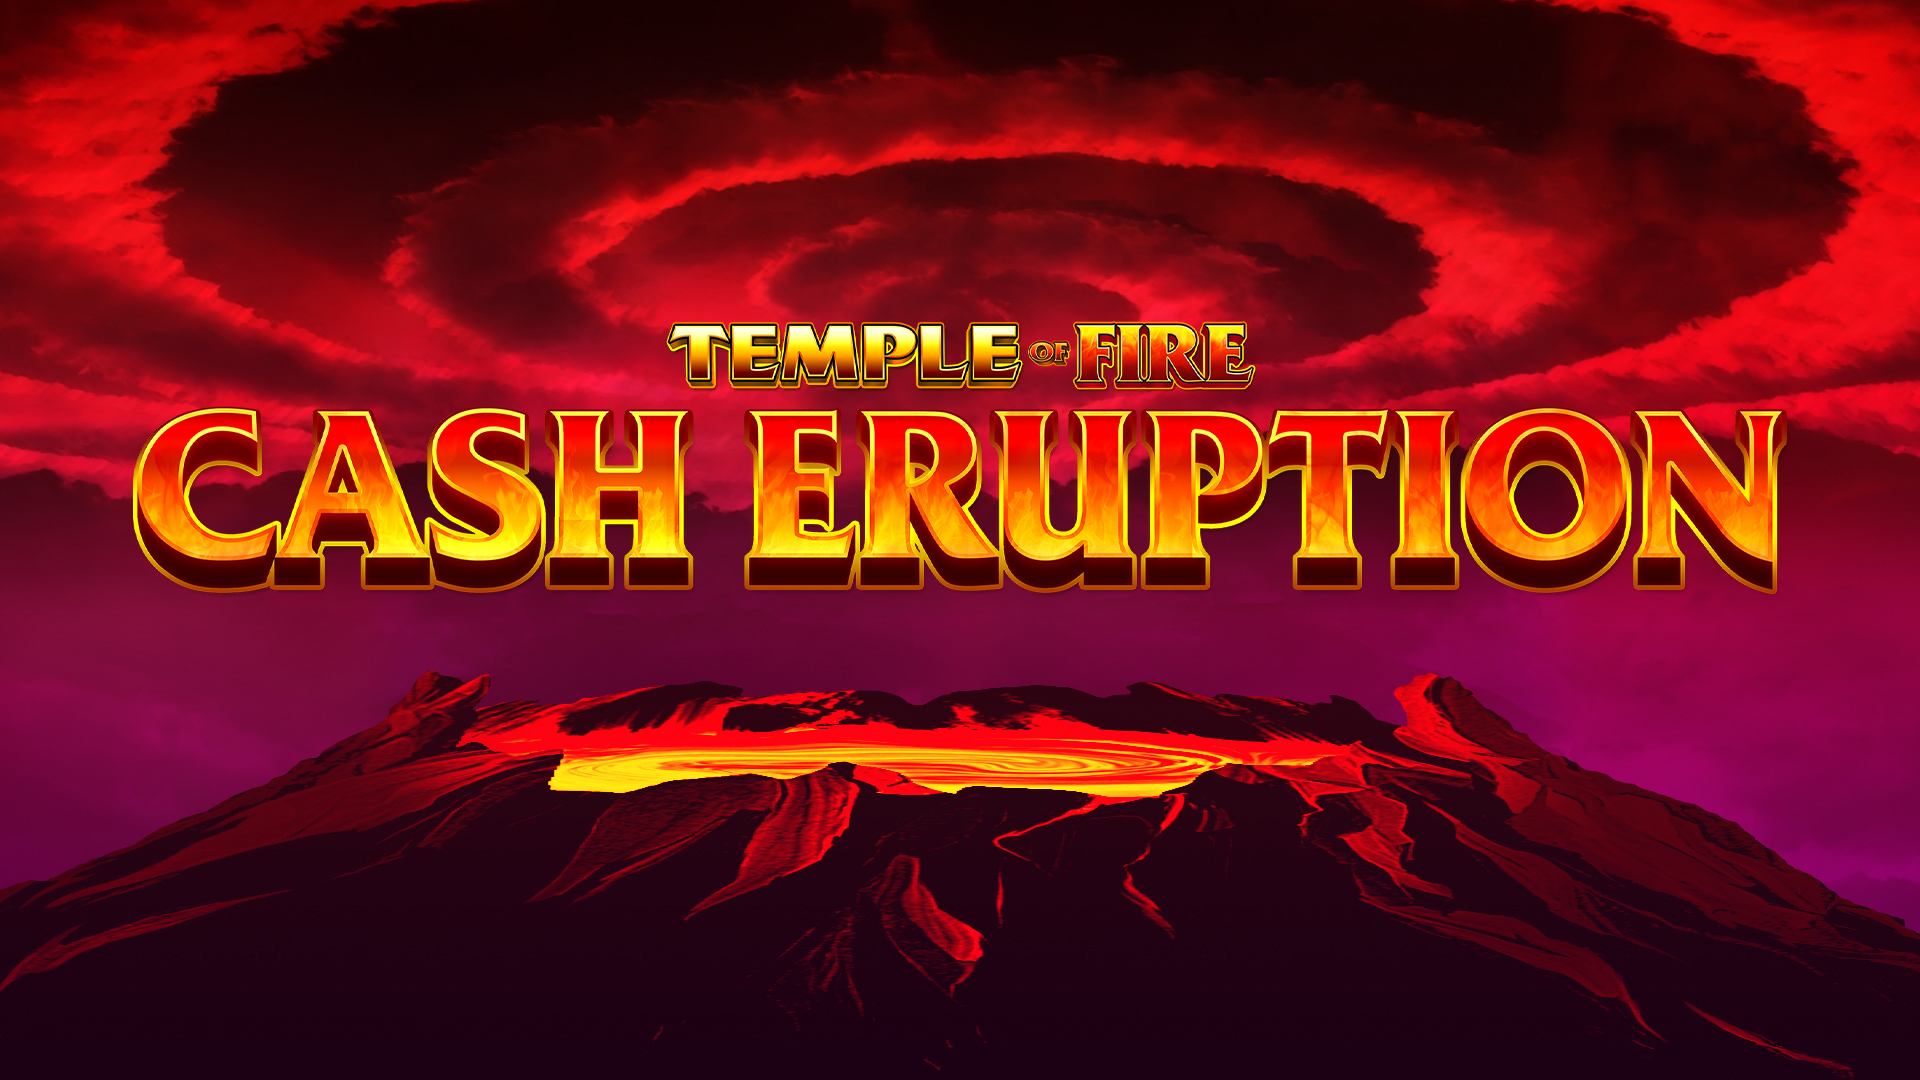 Picture for Temple of Fire Cash Eruption